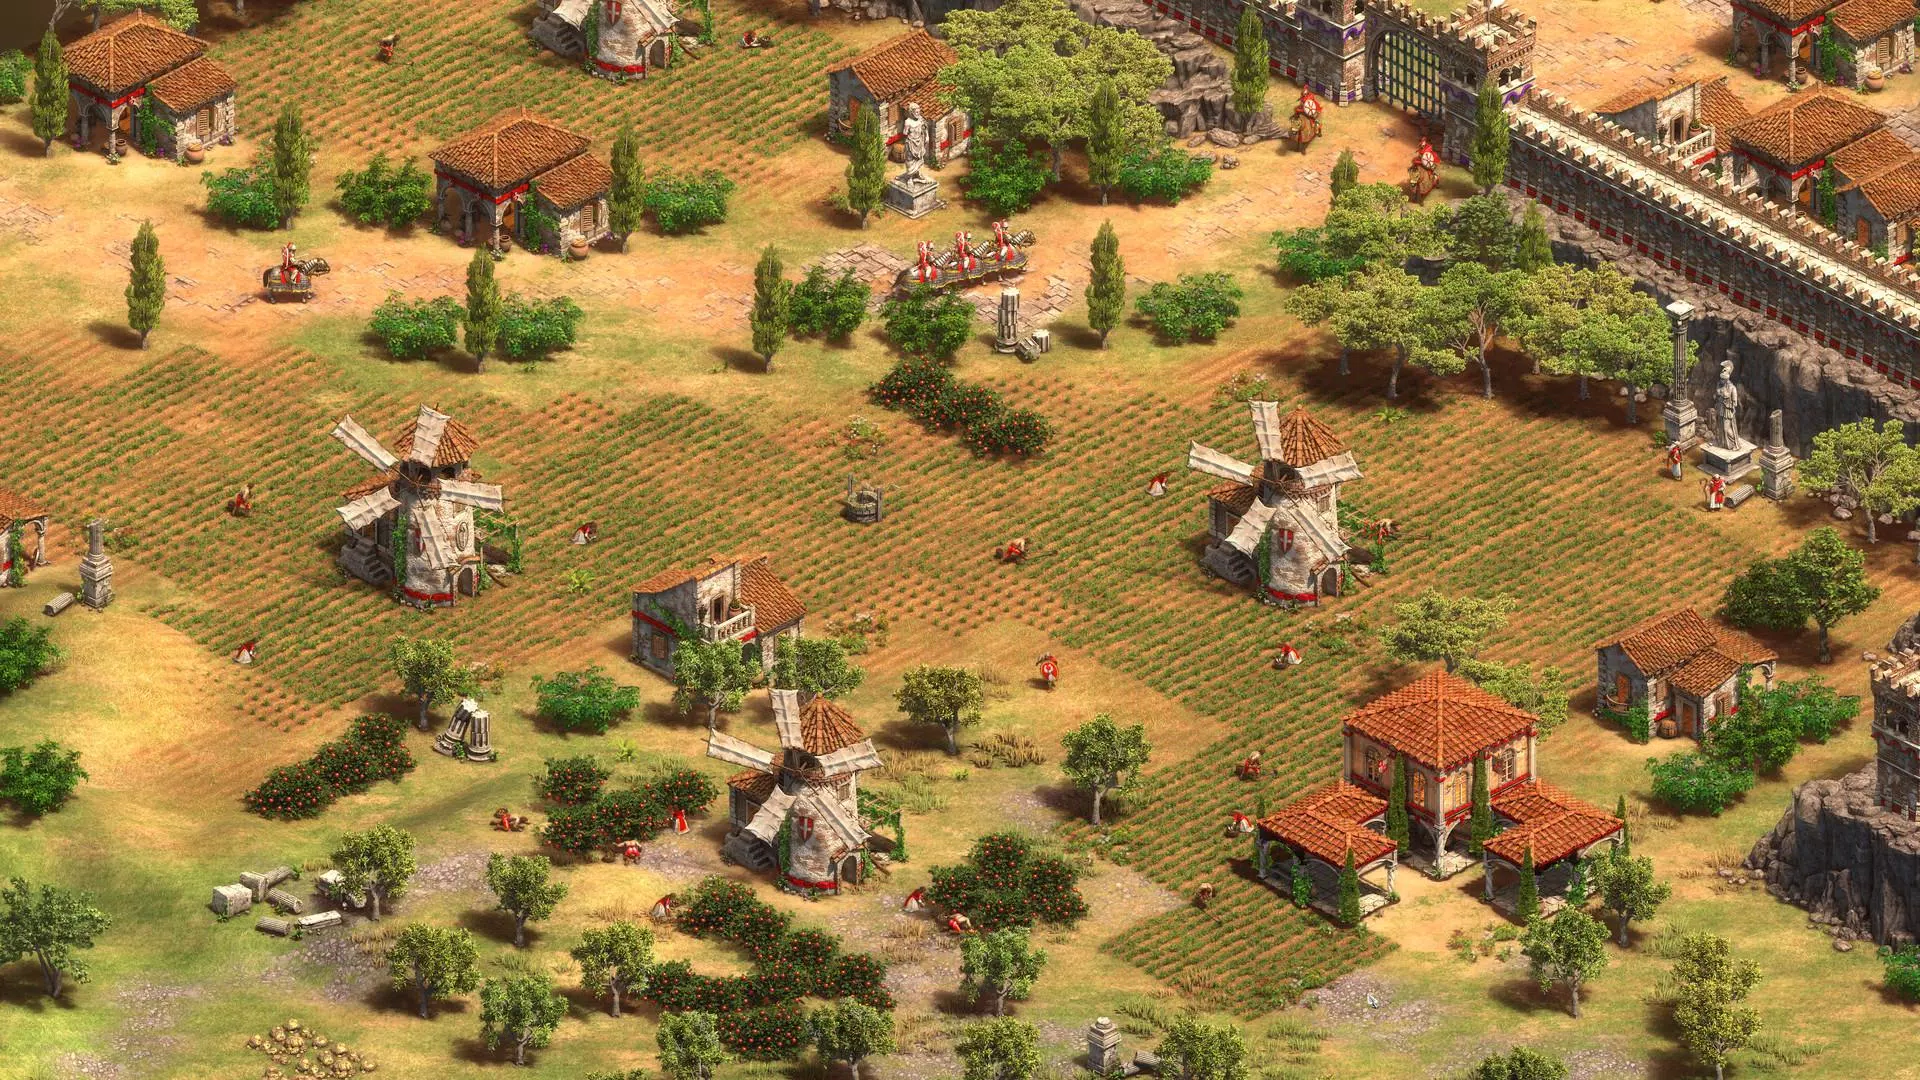 Gameplay of Age of Empires Android Apk